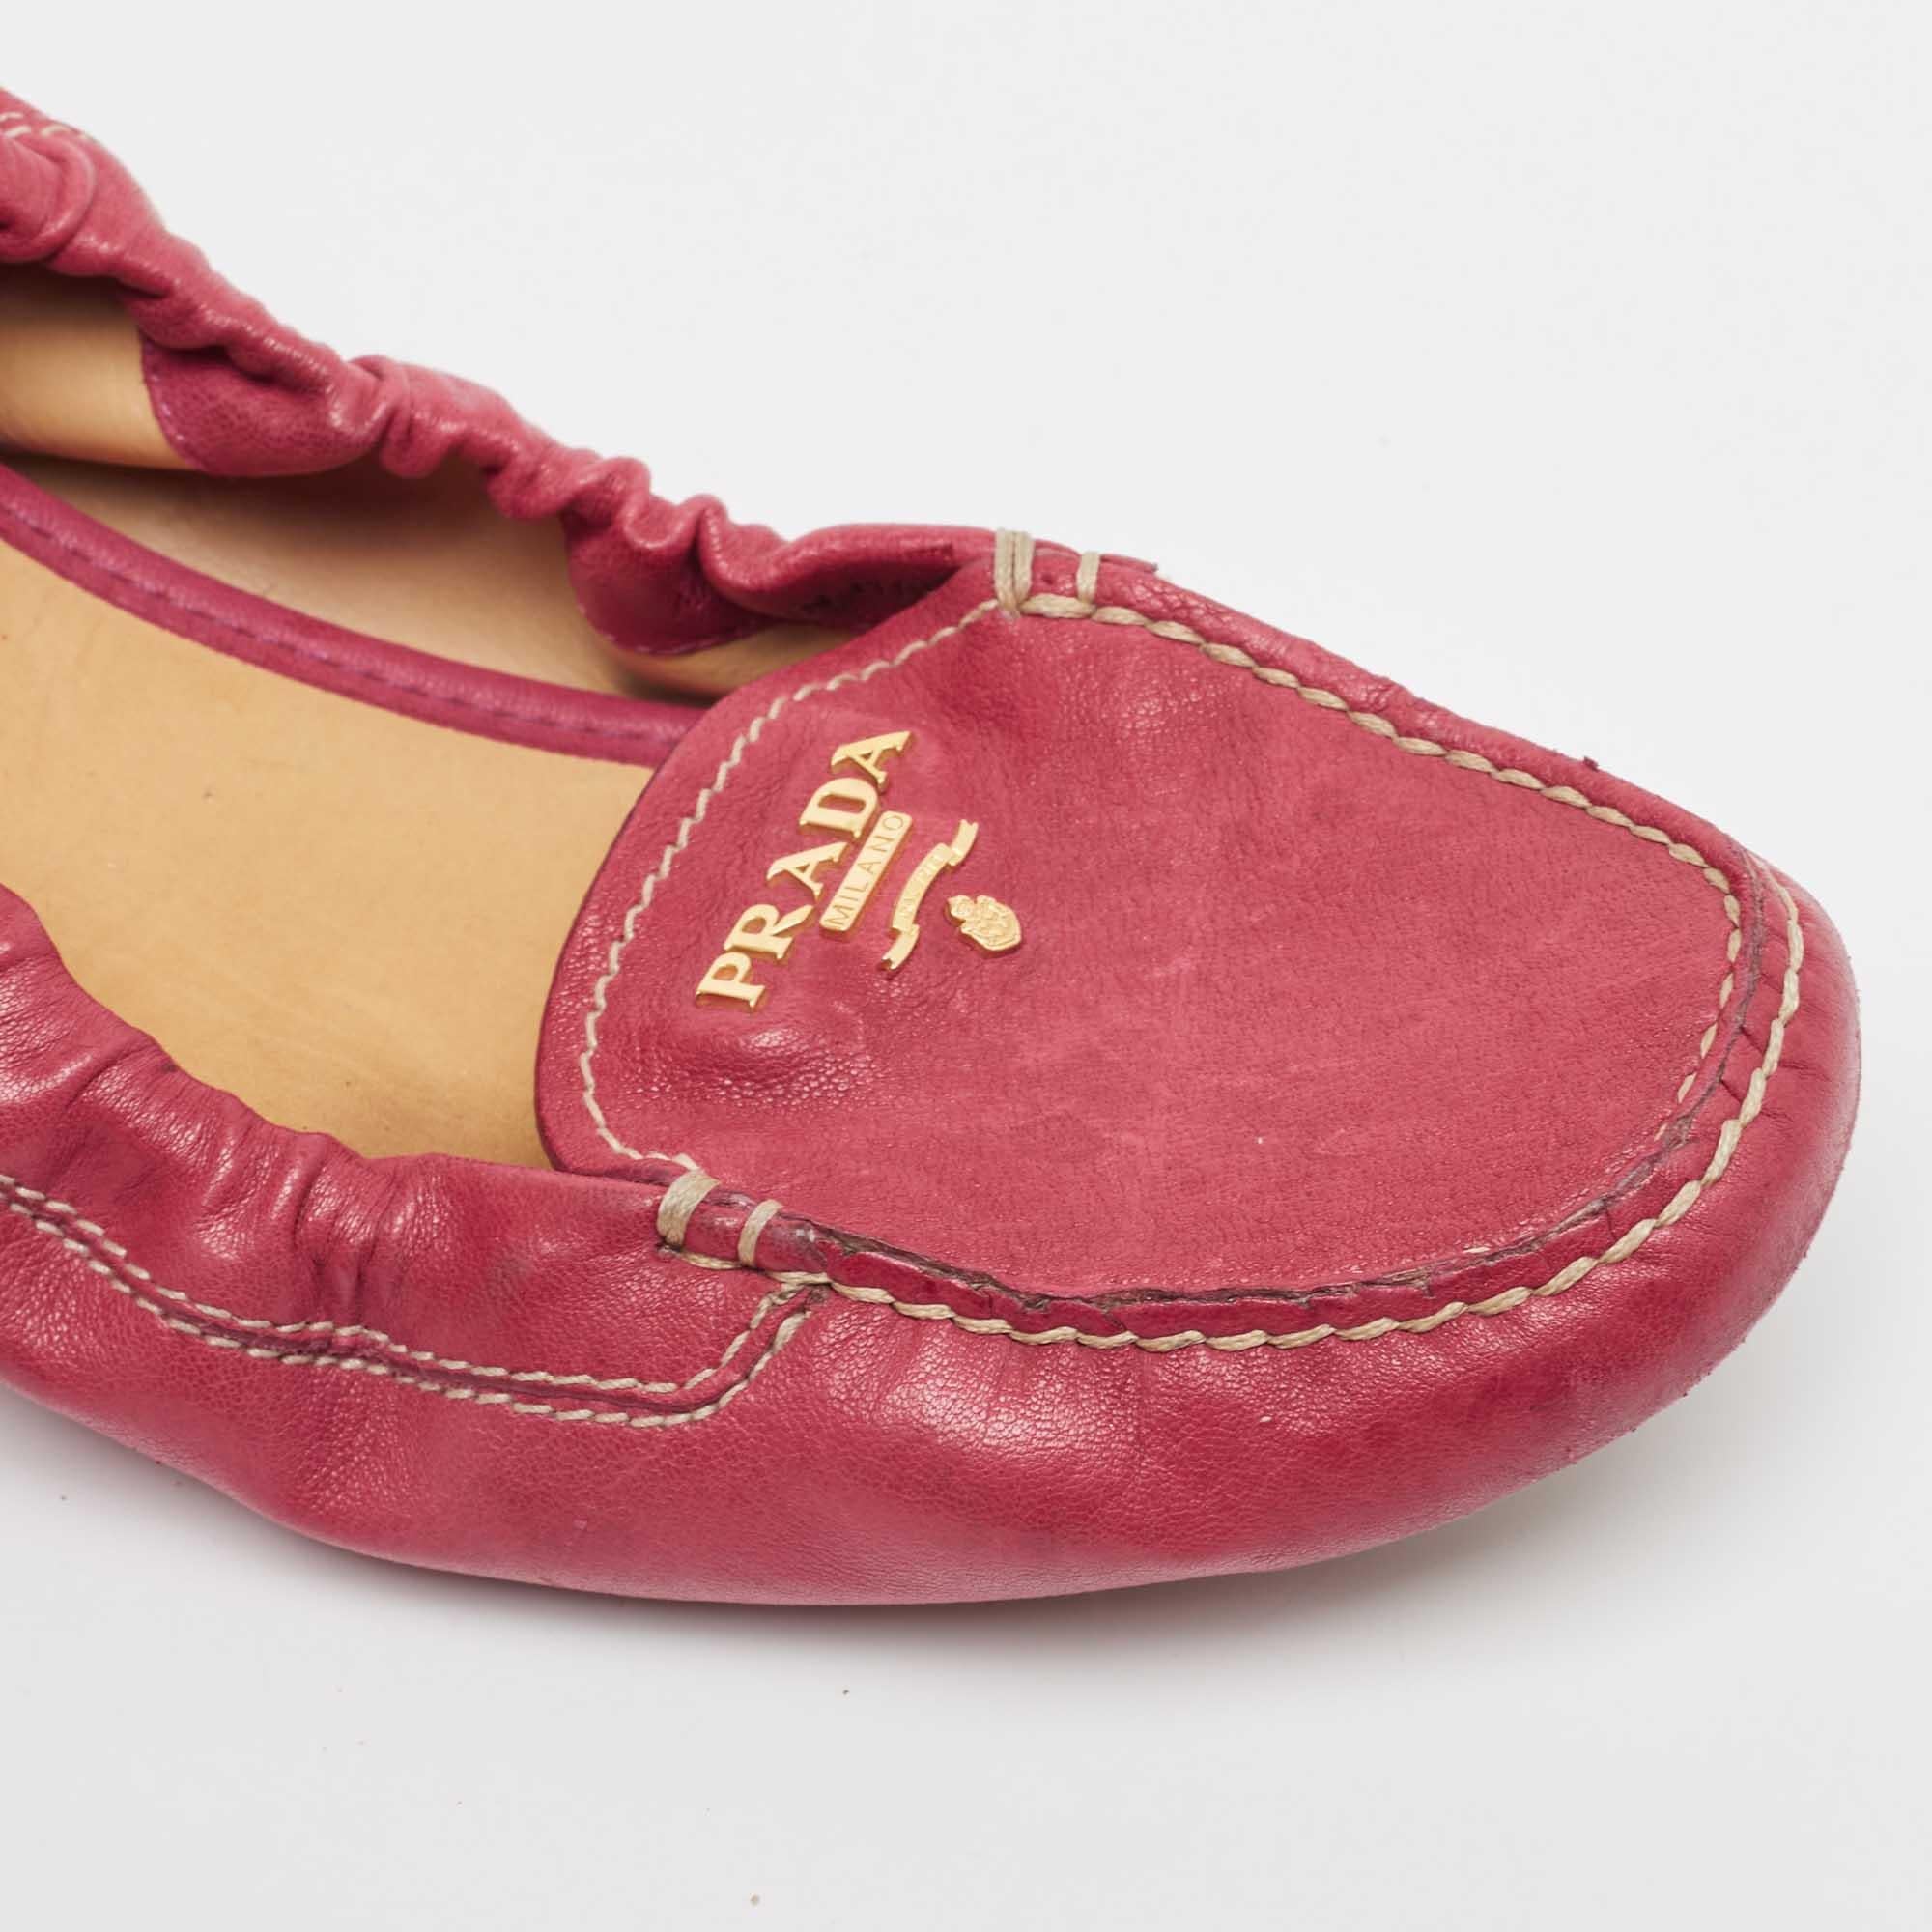 Prada Pink Leather Scrunch Slip On Loafers Size 36.5 For Sale 2